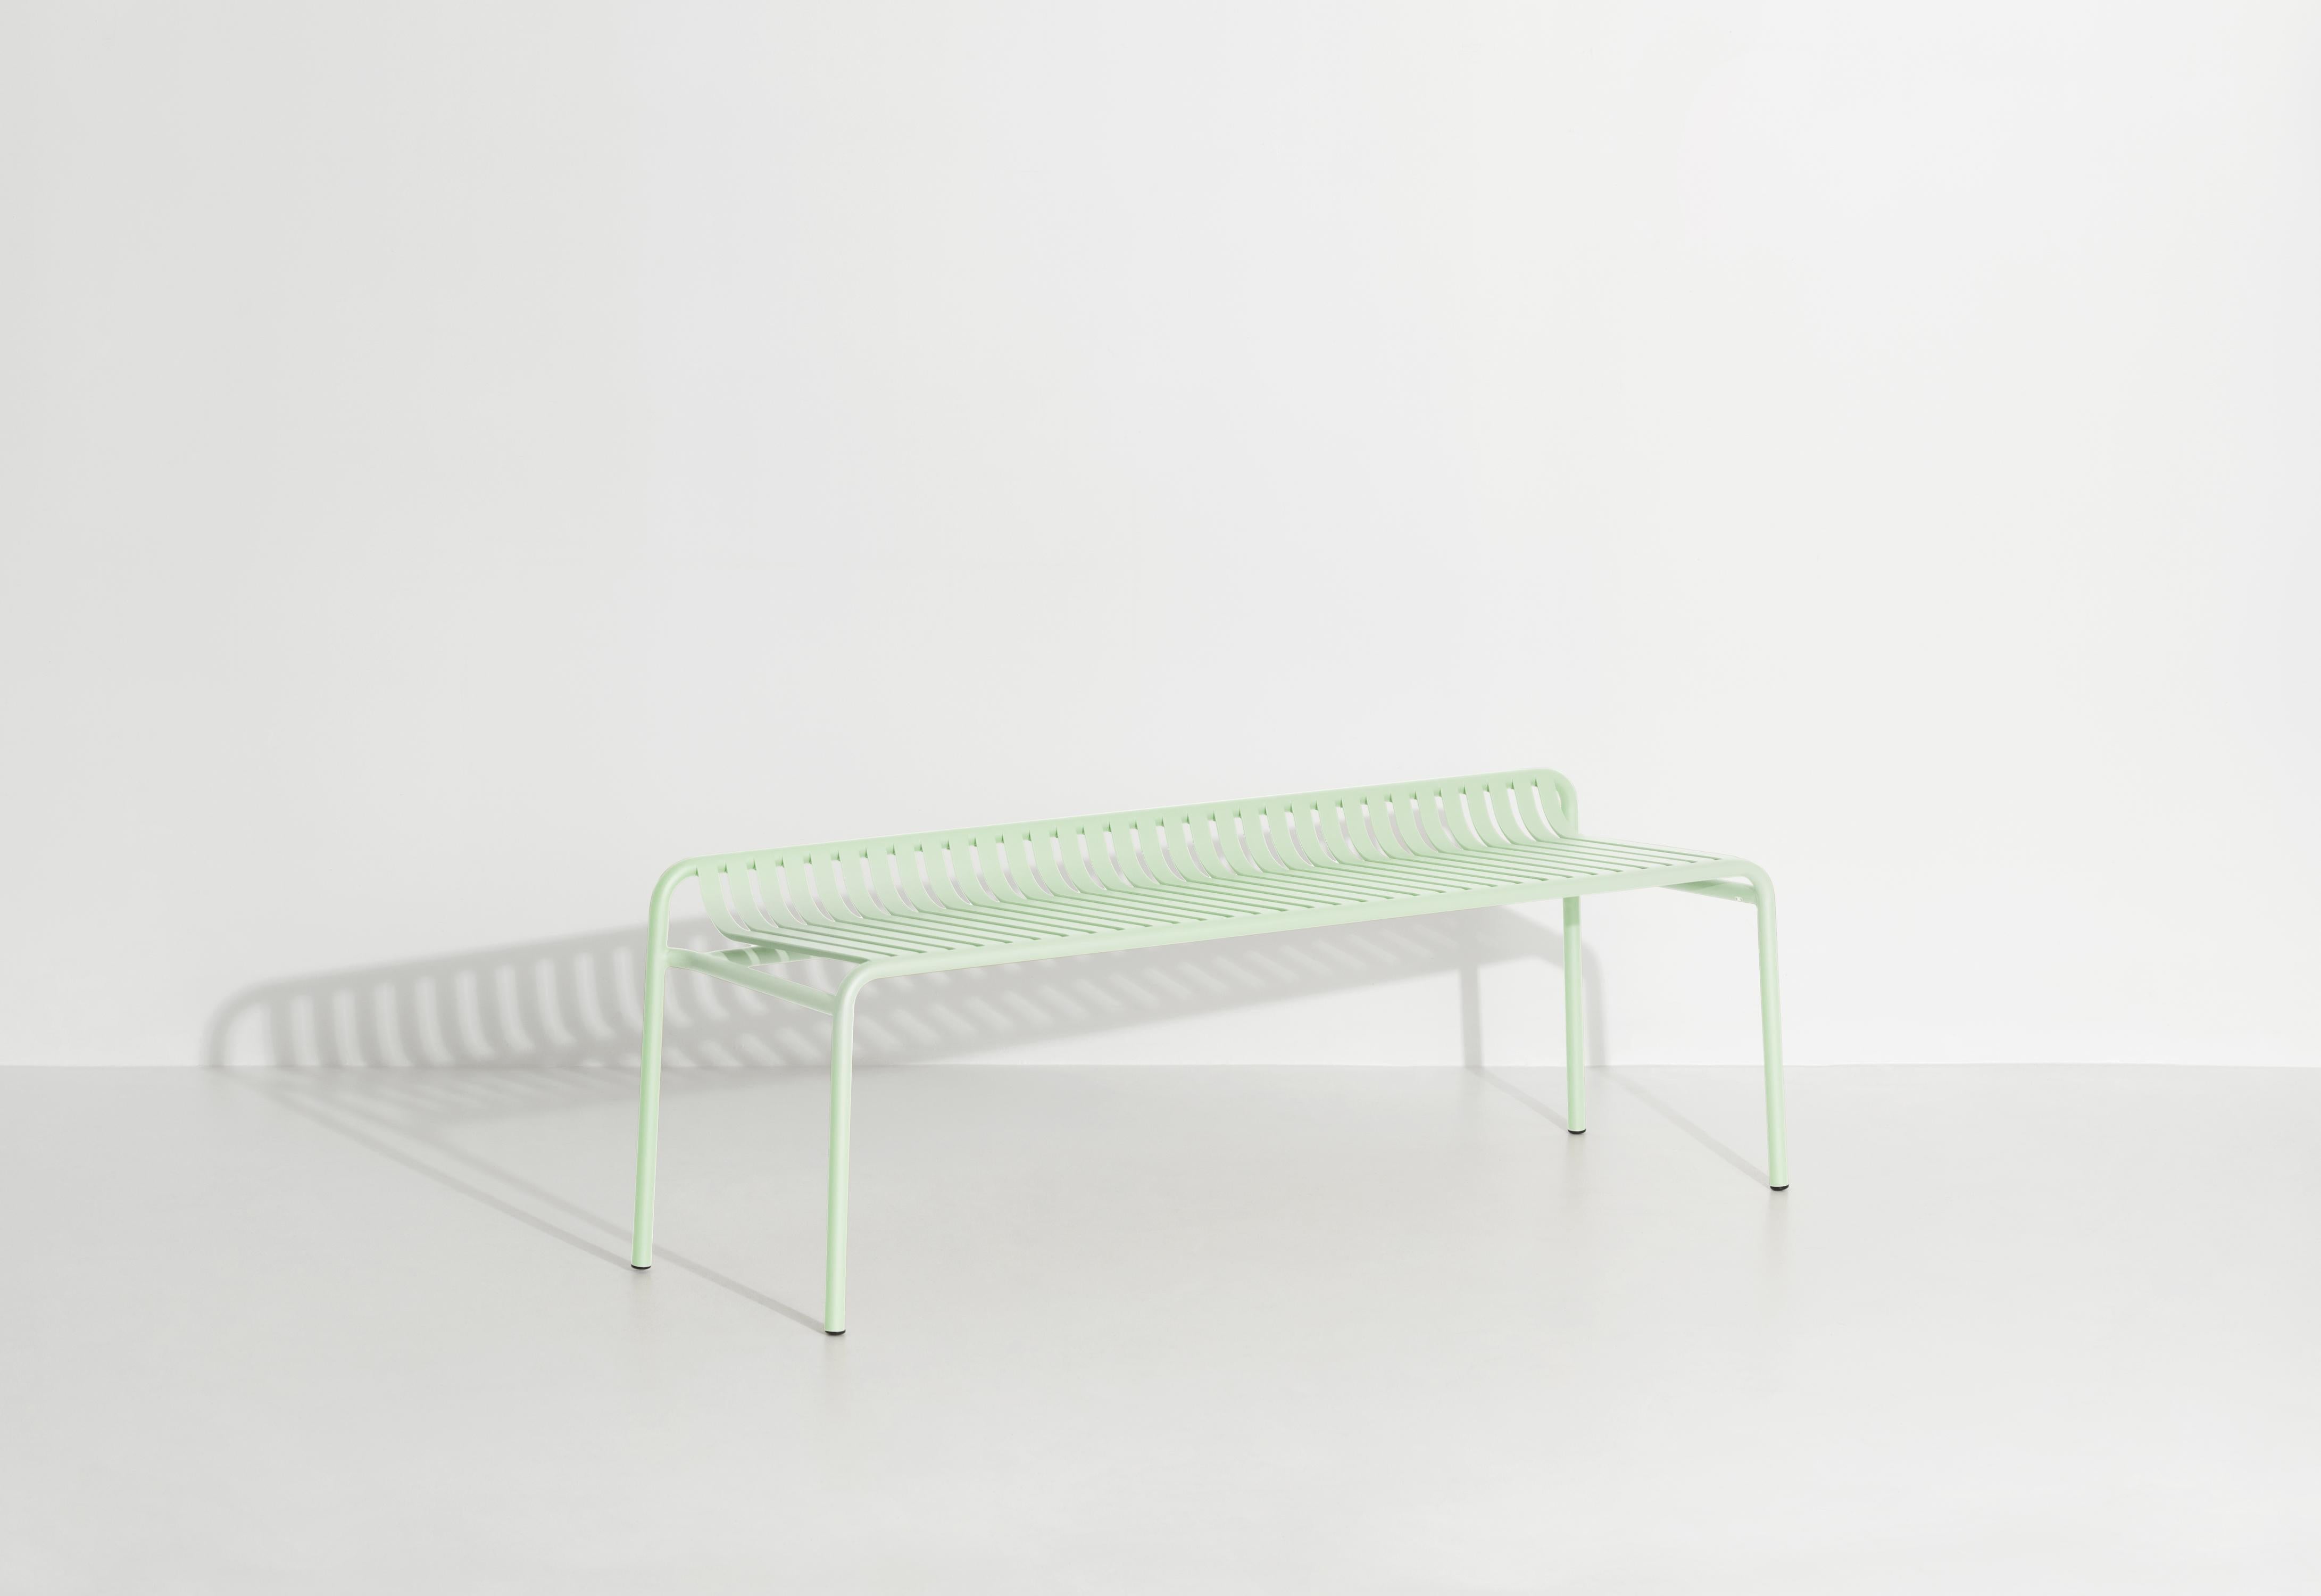 Petite Friture Week-End Bench without Back in Pastel Green Aluminium by Studio BrichetZiegler, 2017

The week-end collection is a full range of outdoor furniture, in aluminium grained epoxy paint, matt finish, that includes 18 functions and 8